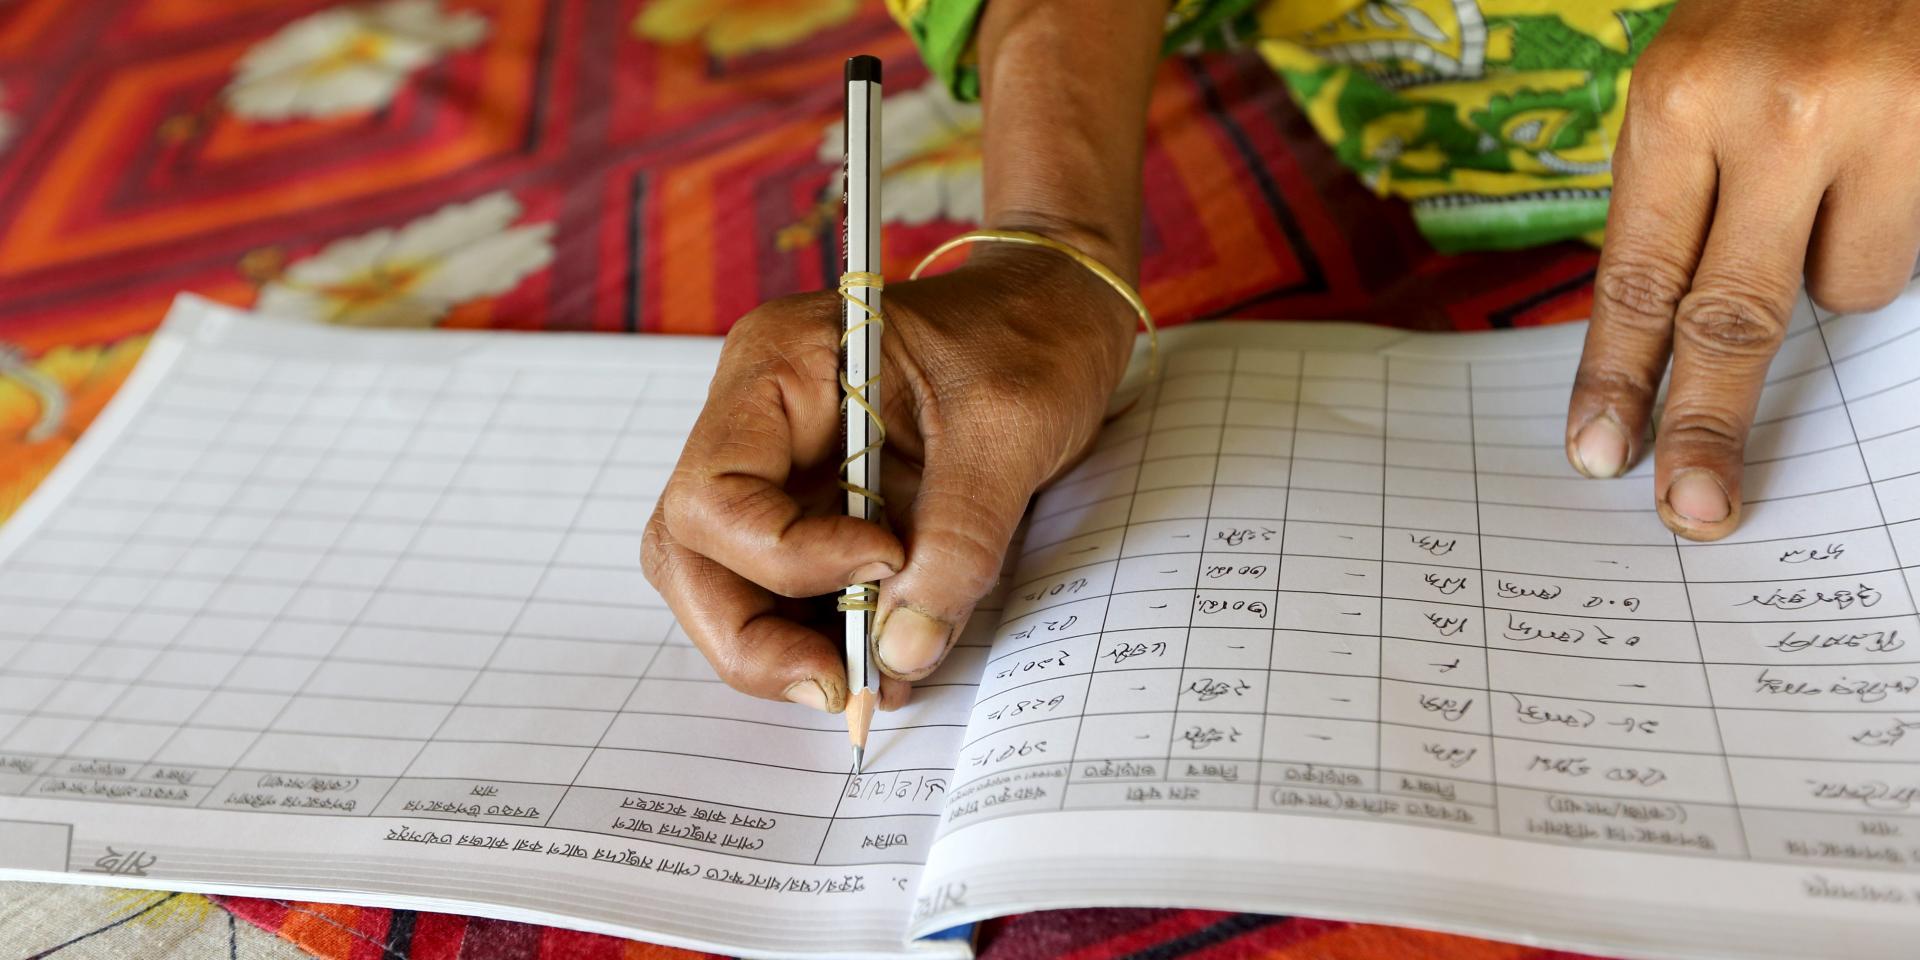 The woman writing data on her data entry book in Jessore, Bangladesh.